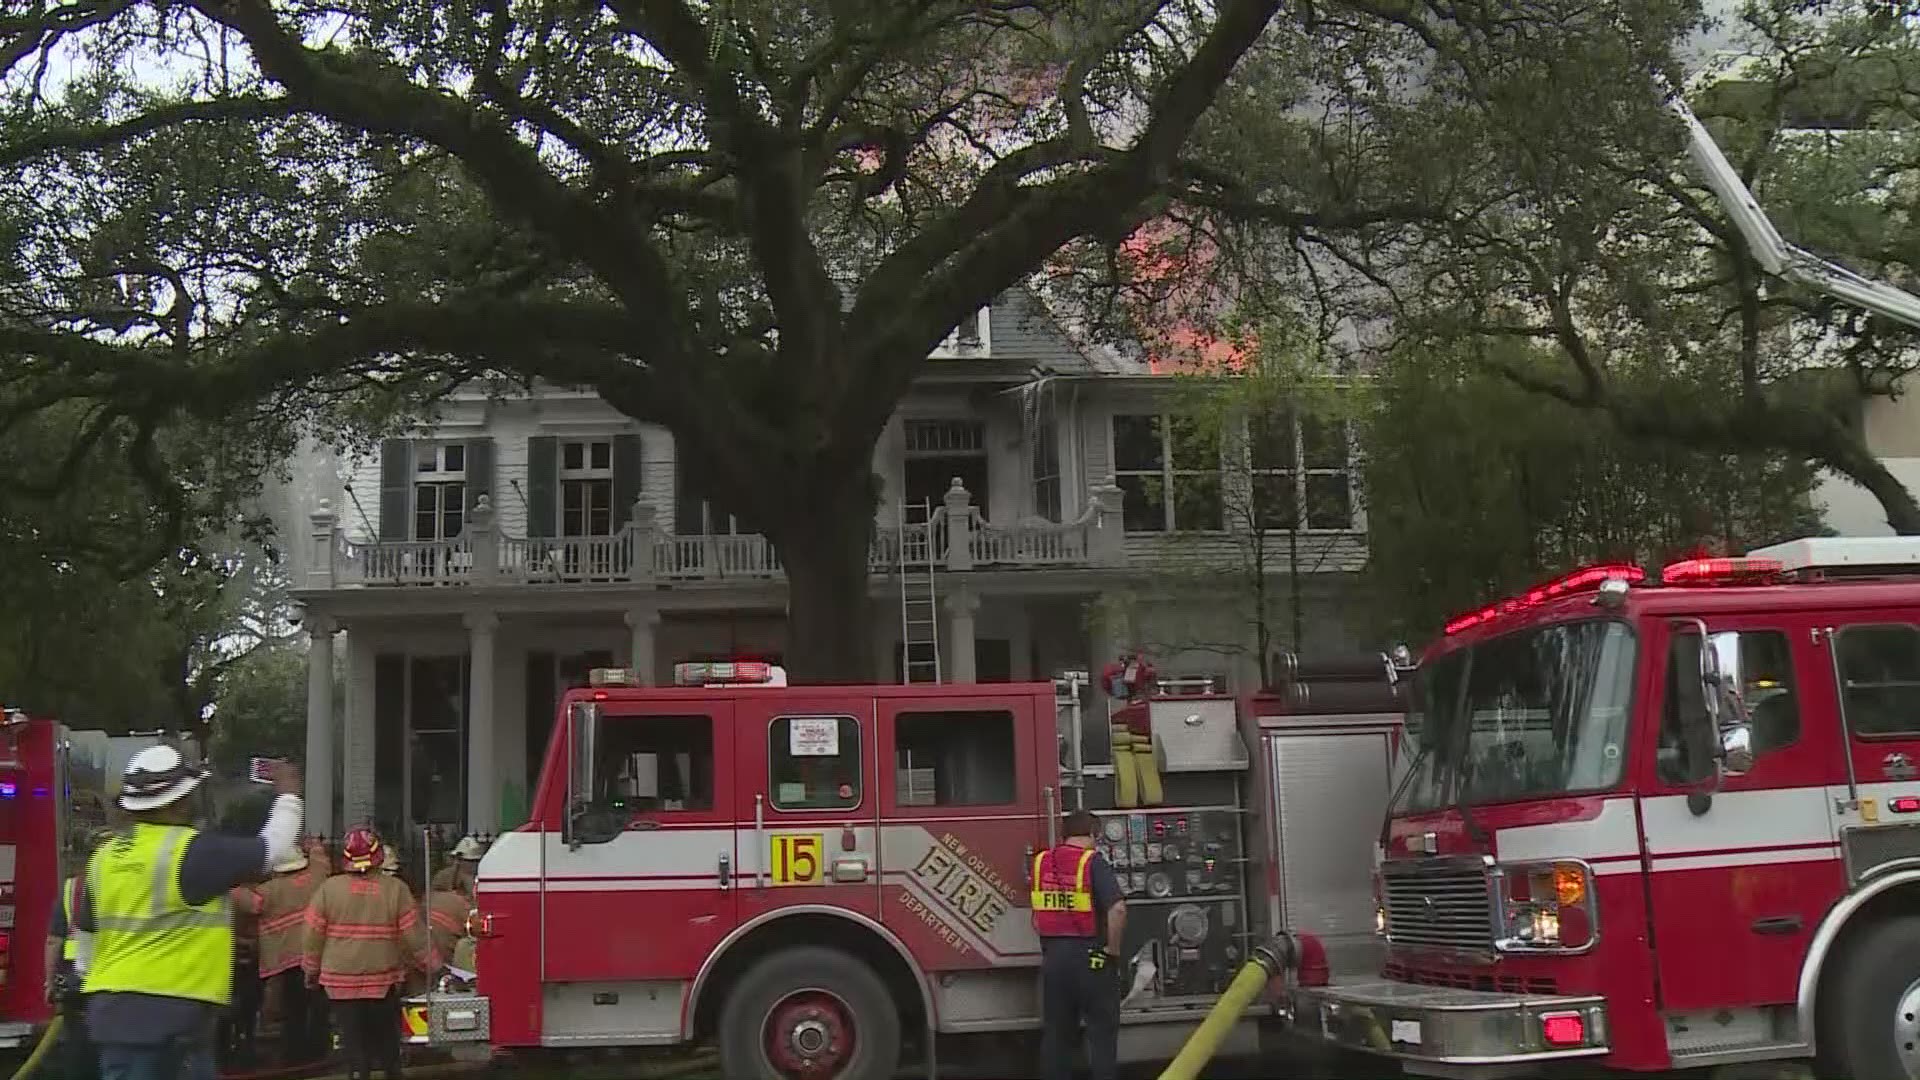 The fire was upgraded to a 7-alarm fire. As of 11:30 a.m. the fire was still not under control.